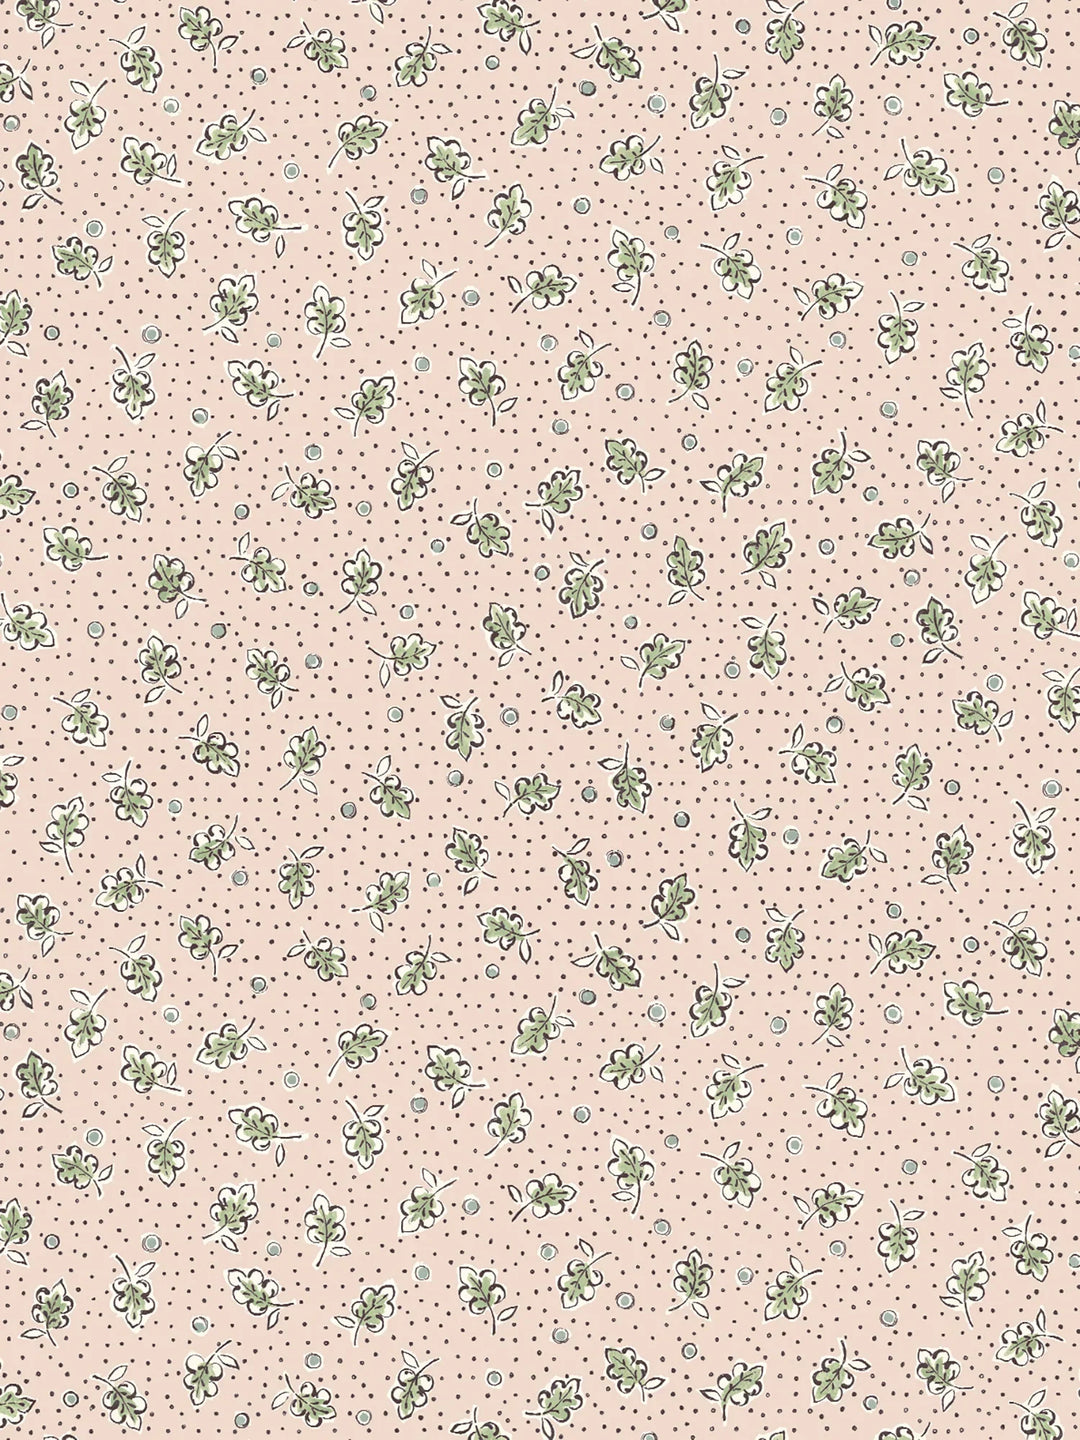 mille-feuilles-wallpaper-clay-pink-dainty-leaves-dots